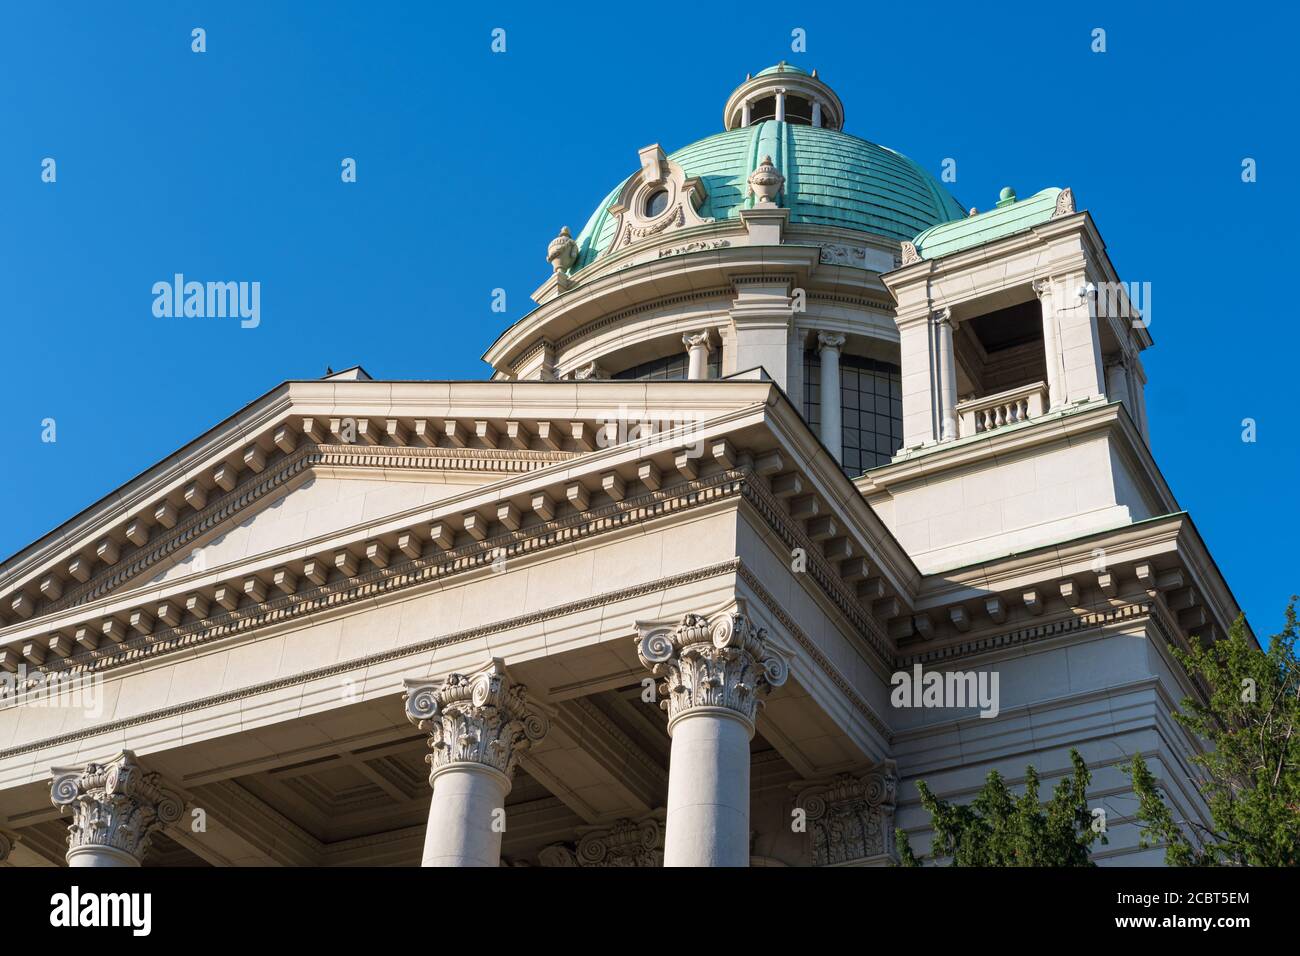 Summer House of the National Assembly of the Republic of Serbia (Skupstina) in the center of city of Belgrade, Serbia, Europe. Construction lasted unt Stock Photo